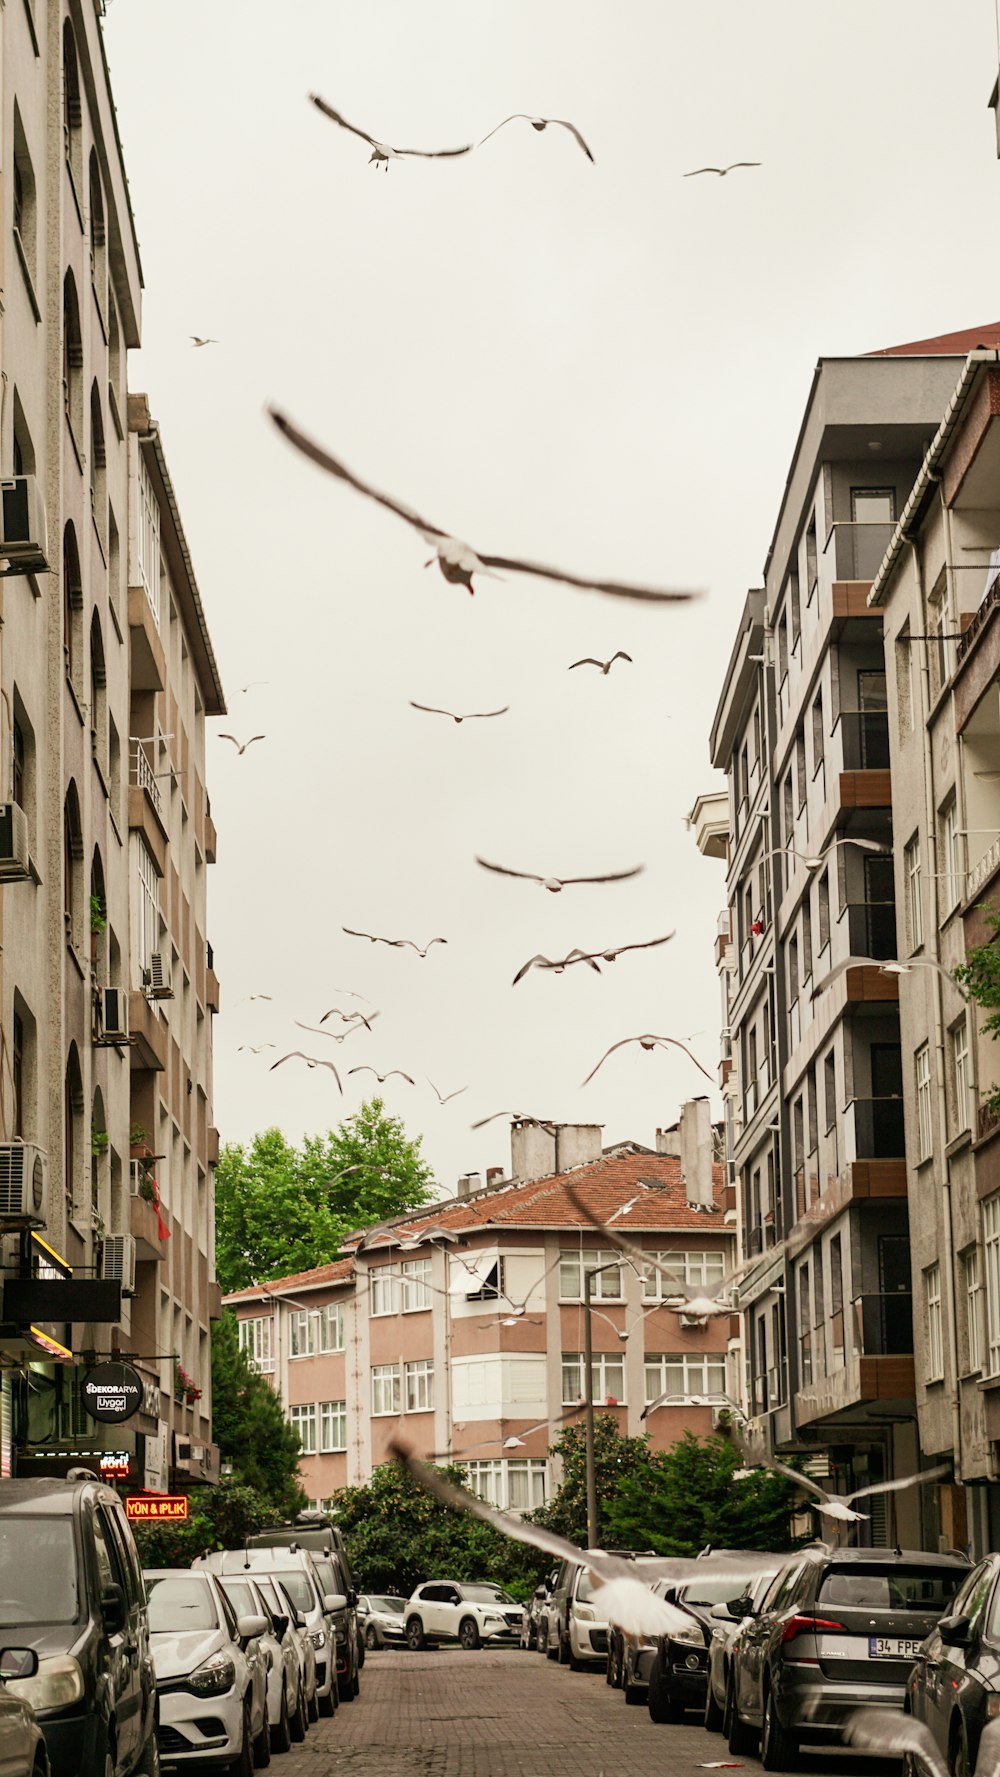 a group of birds flying over a city street